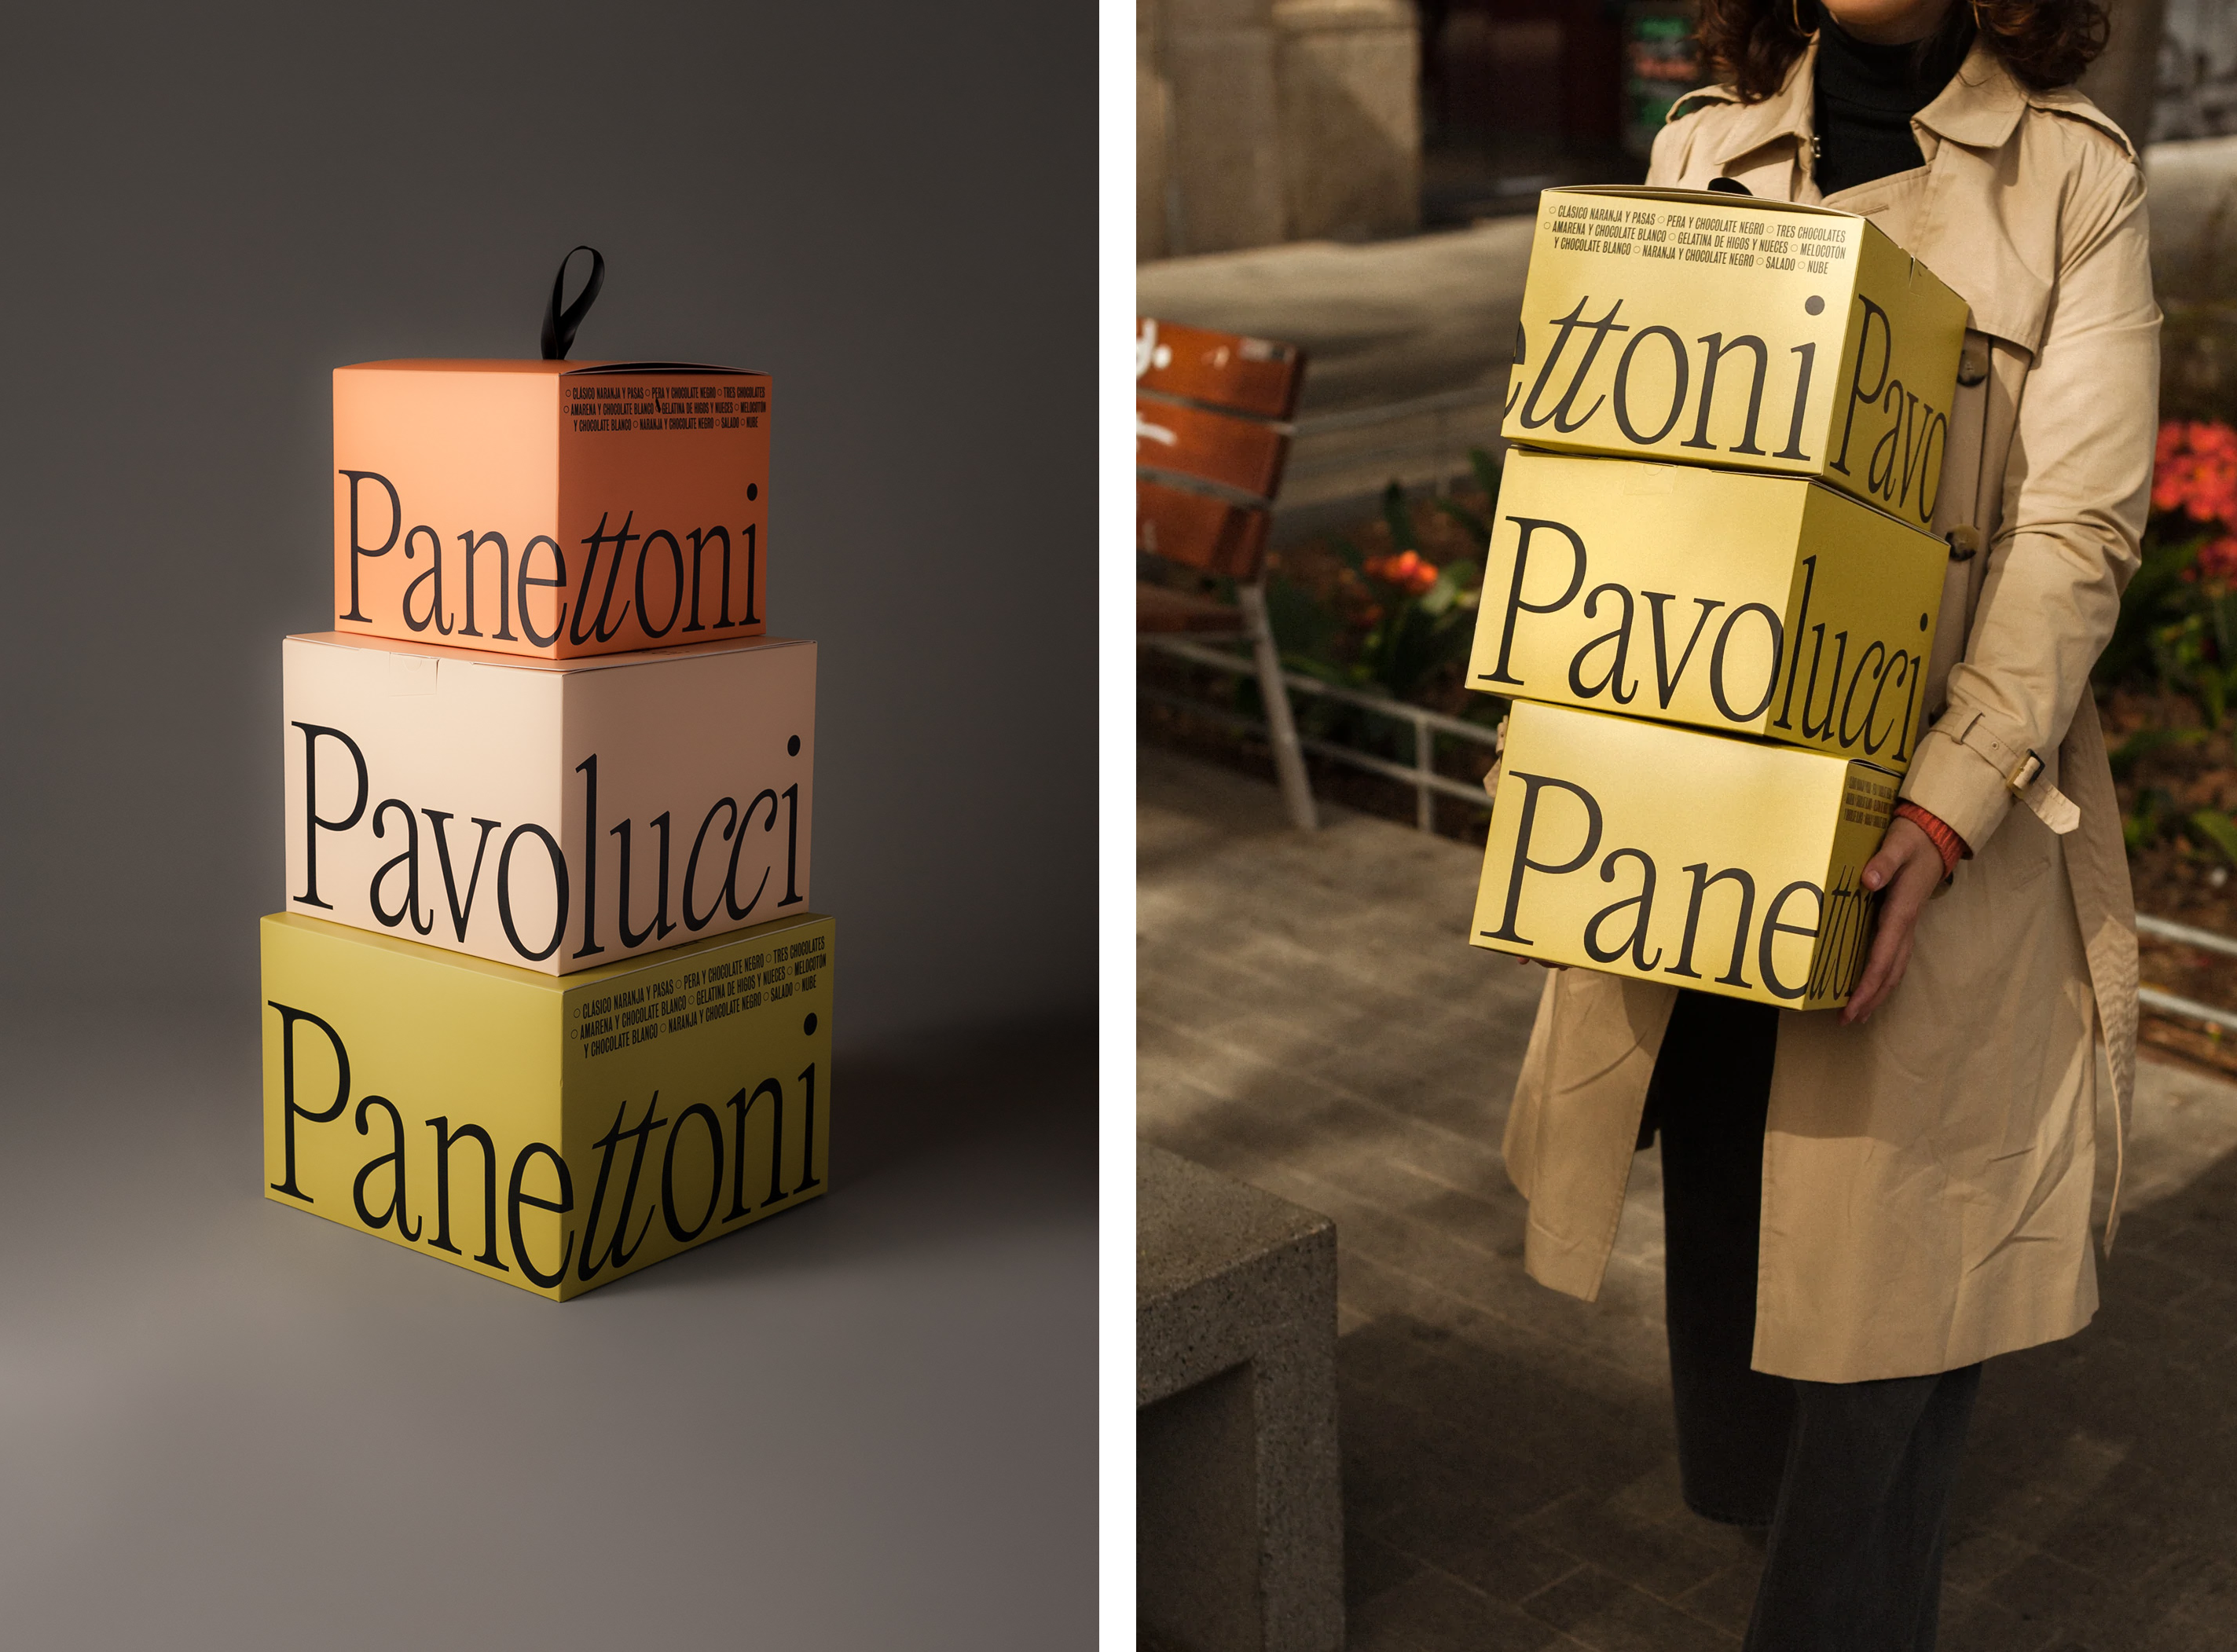 Brand identity, packaging and signage by Requena for Spanish panettone brand Panettoni Pavolucci